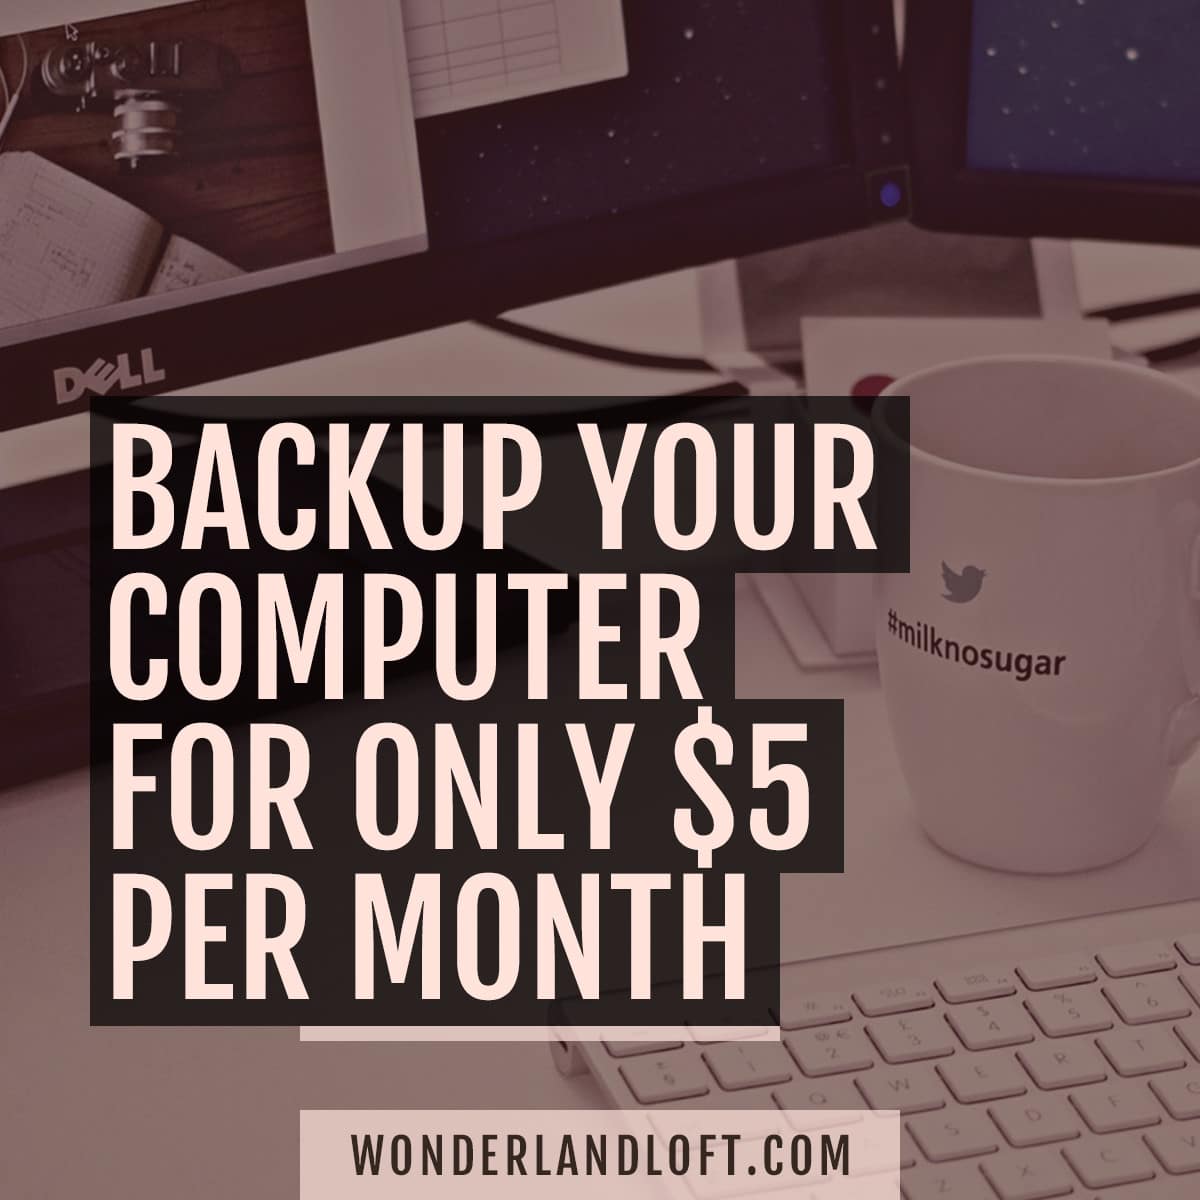 Backup your computer for $5